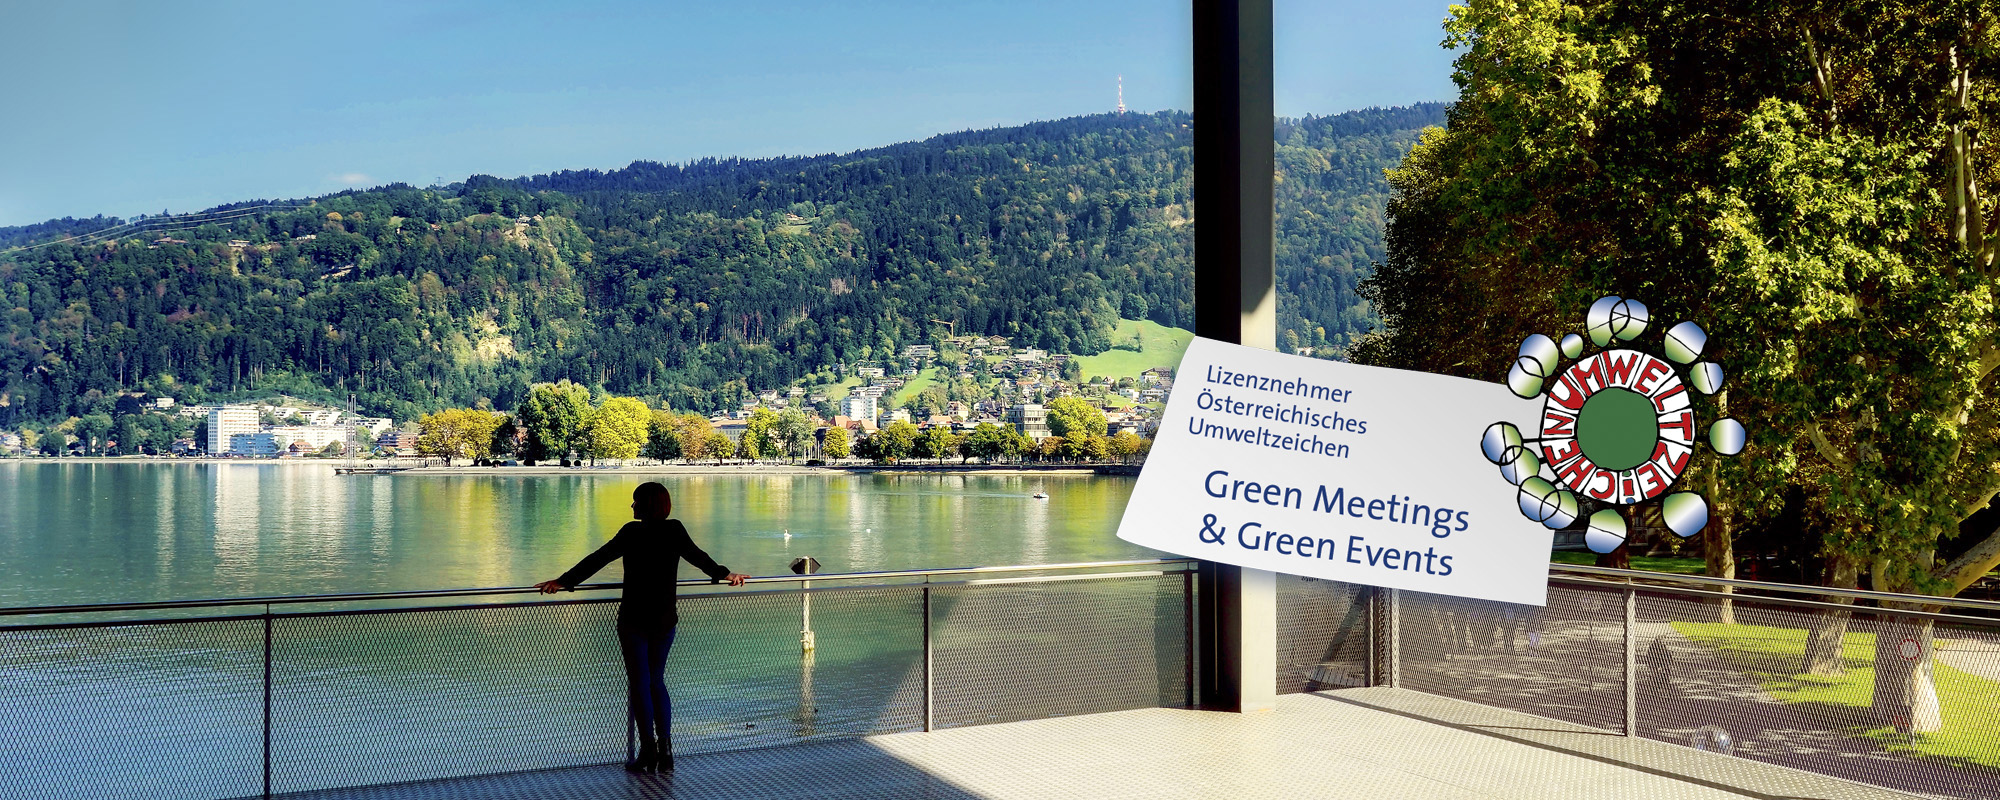 The green location on Lake Constance